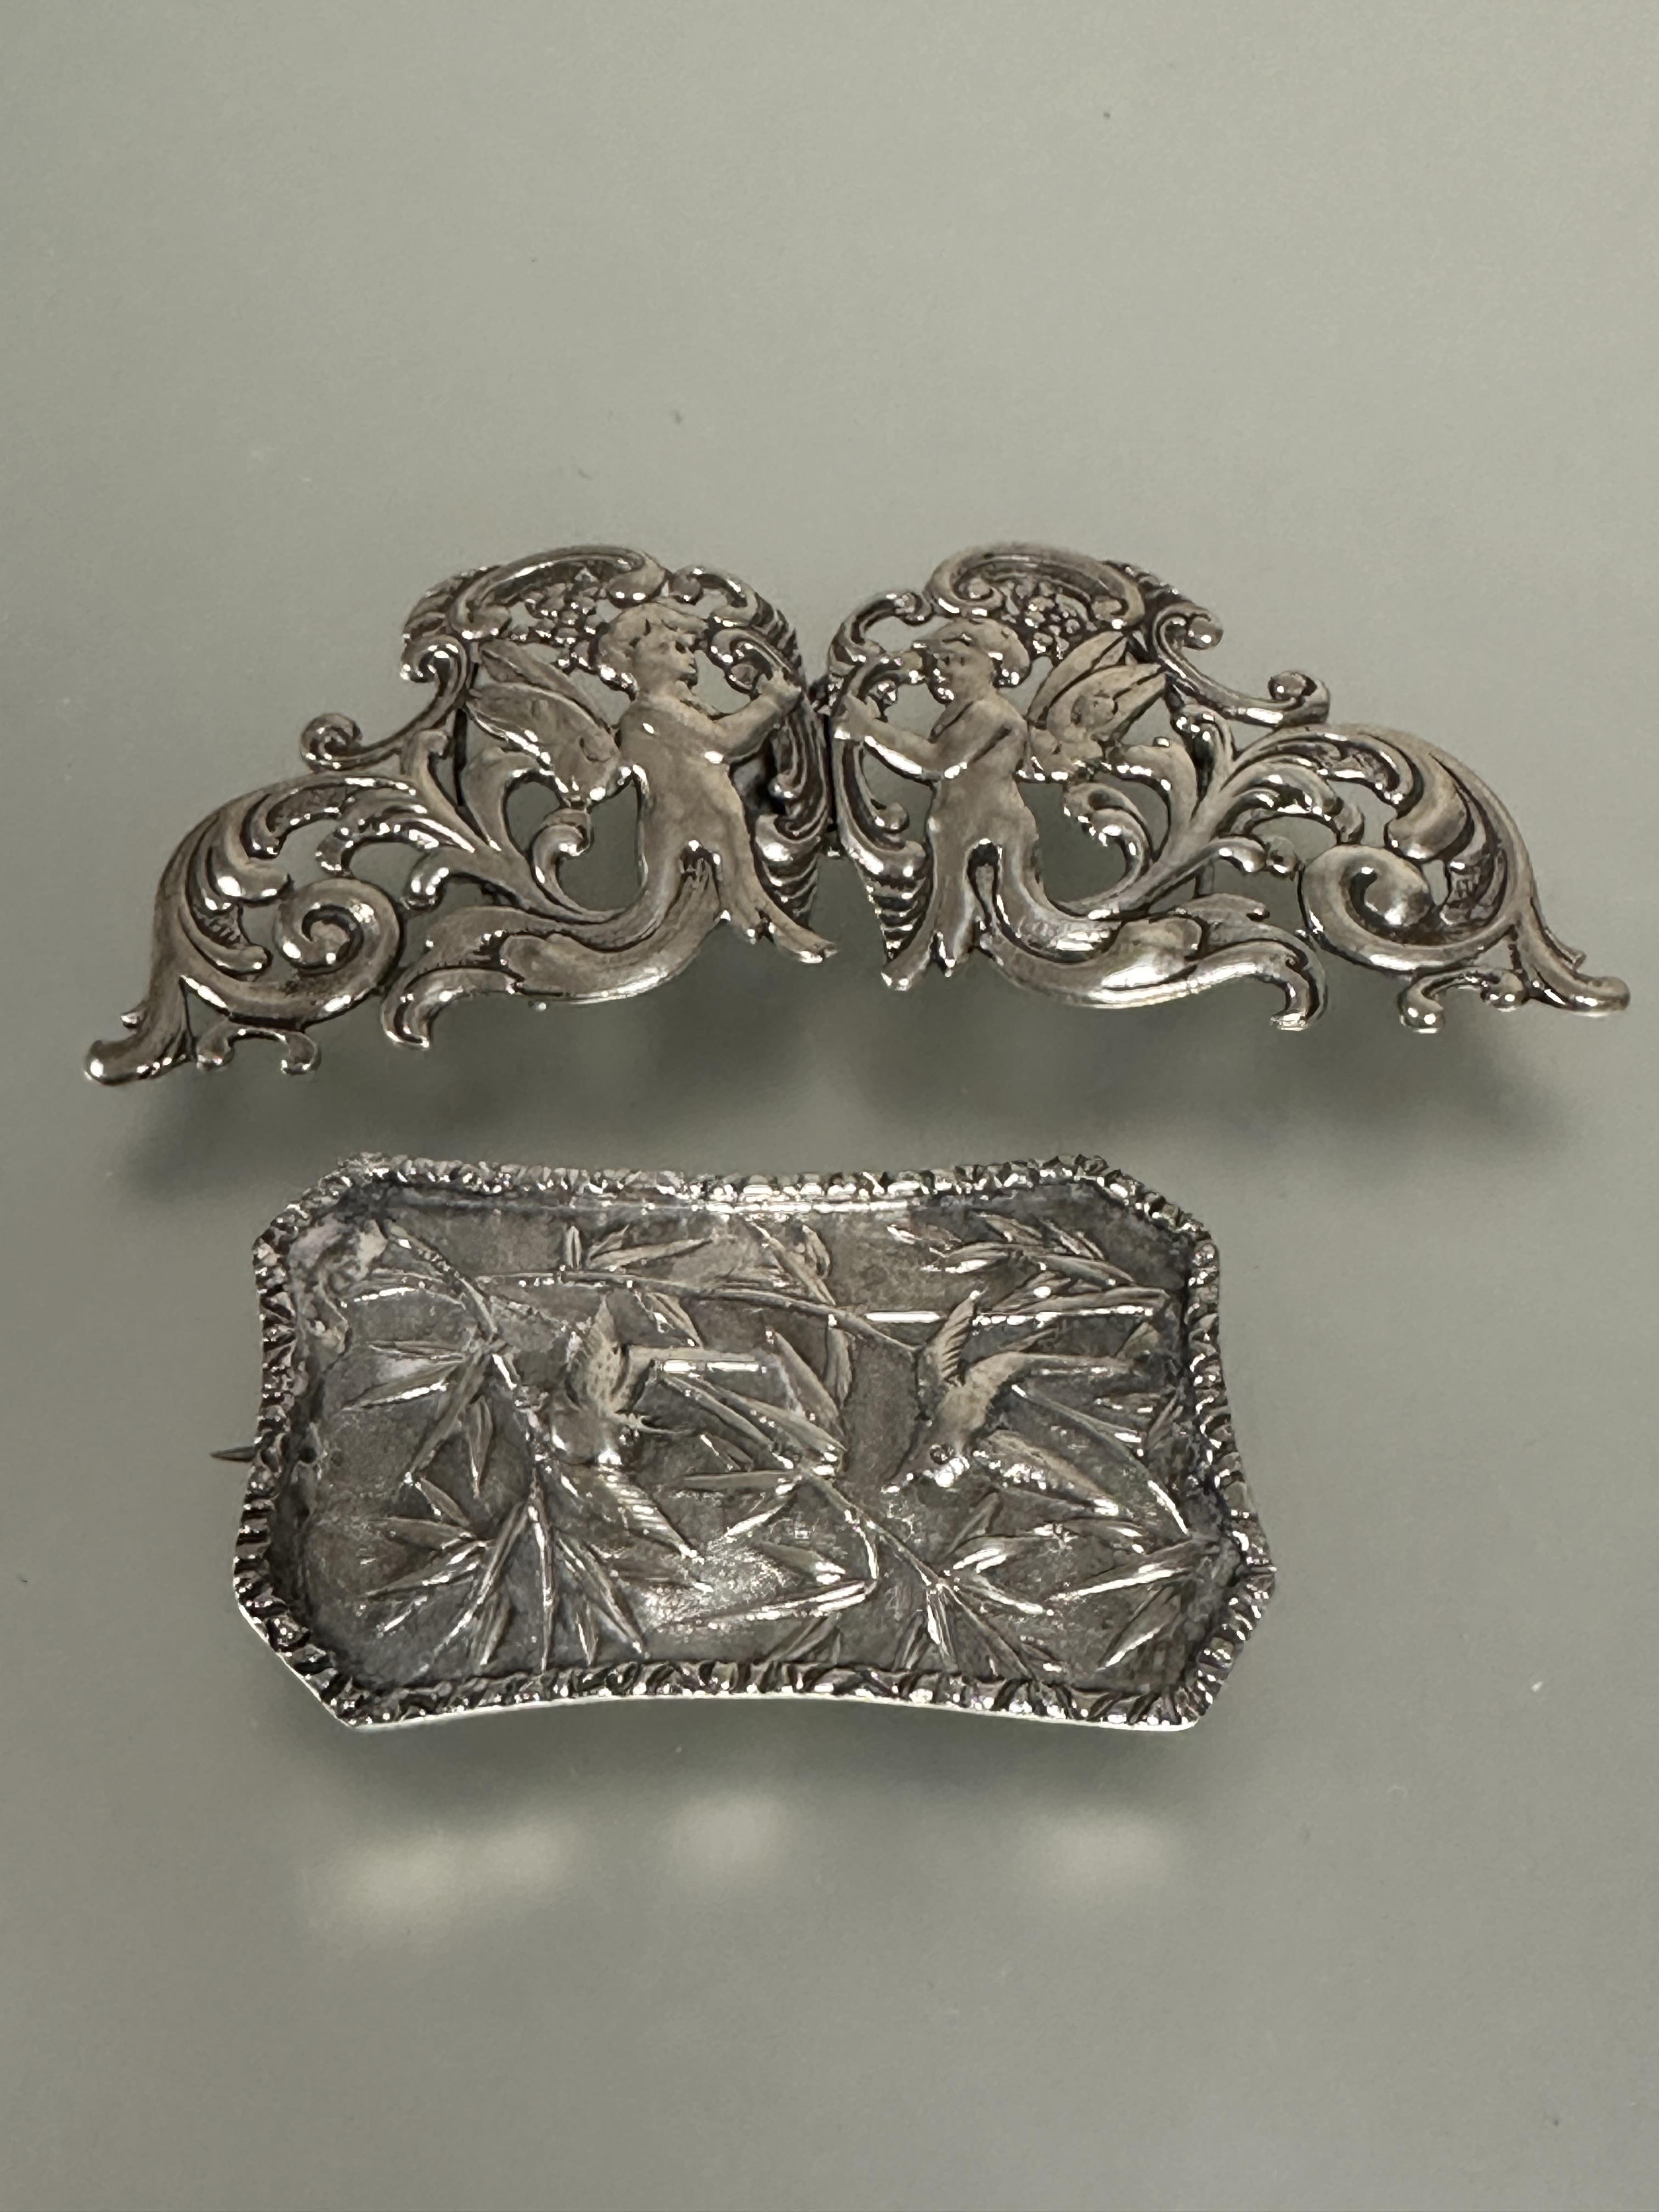 A collection of belt buckles to include a Eastern twin section buckle with seated holy men figures - Image 4 of 7